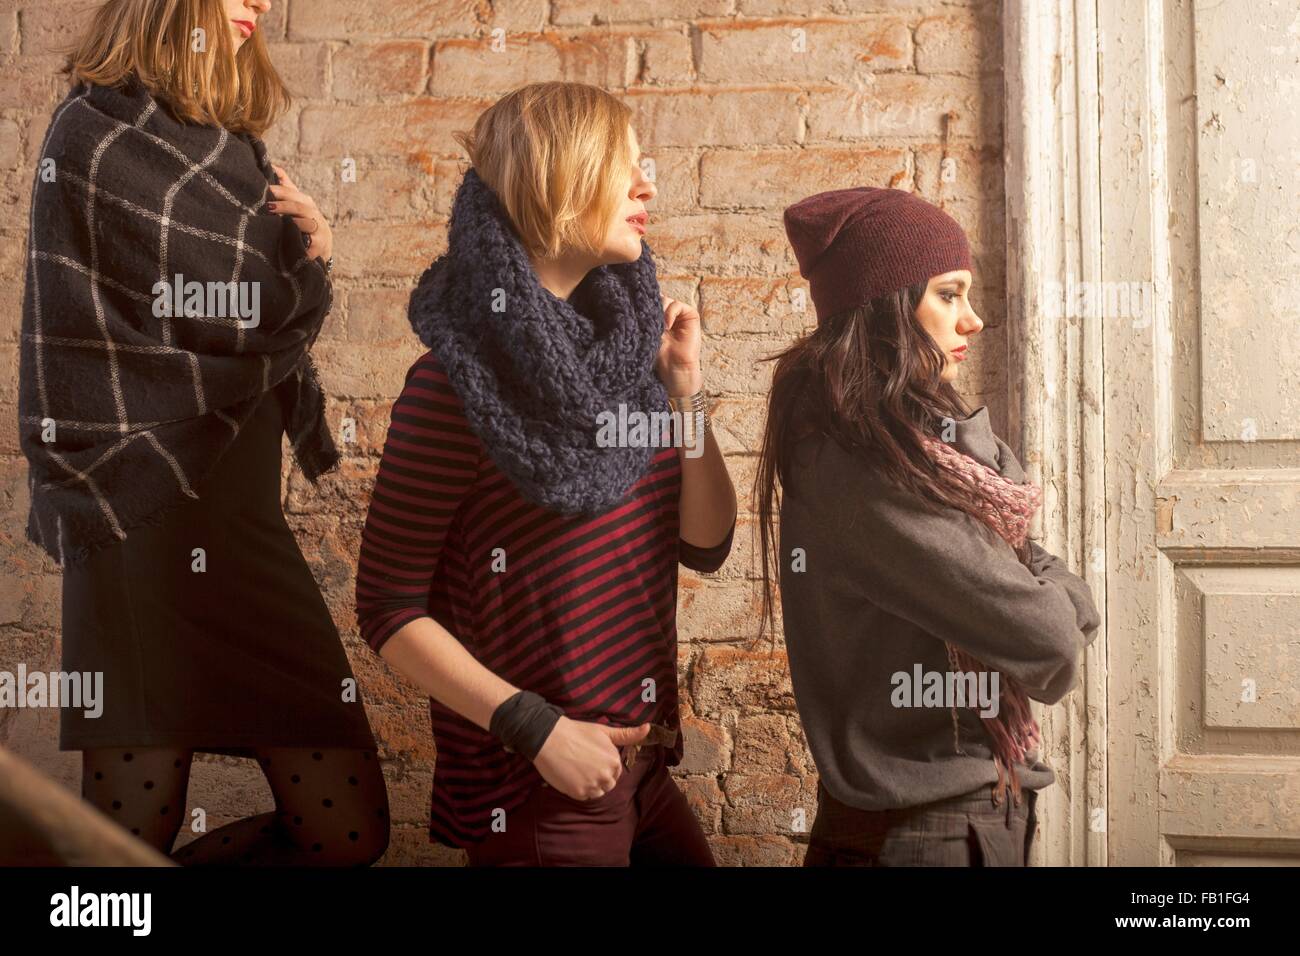 Side view of women wearing knitwear standing on stairs in front of brick wall looking away Stock Photo